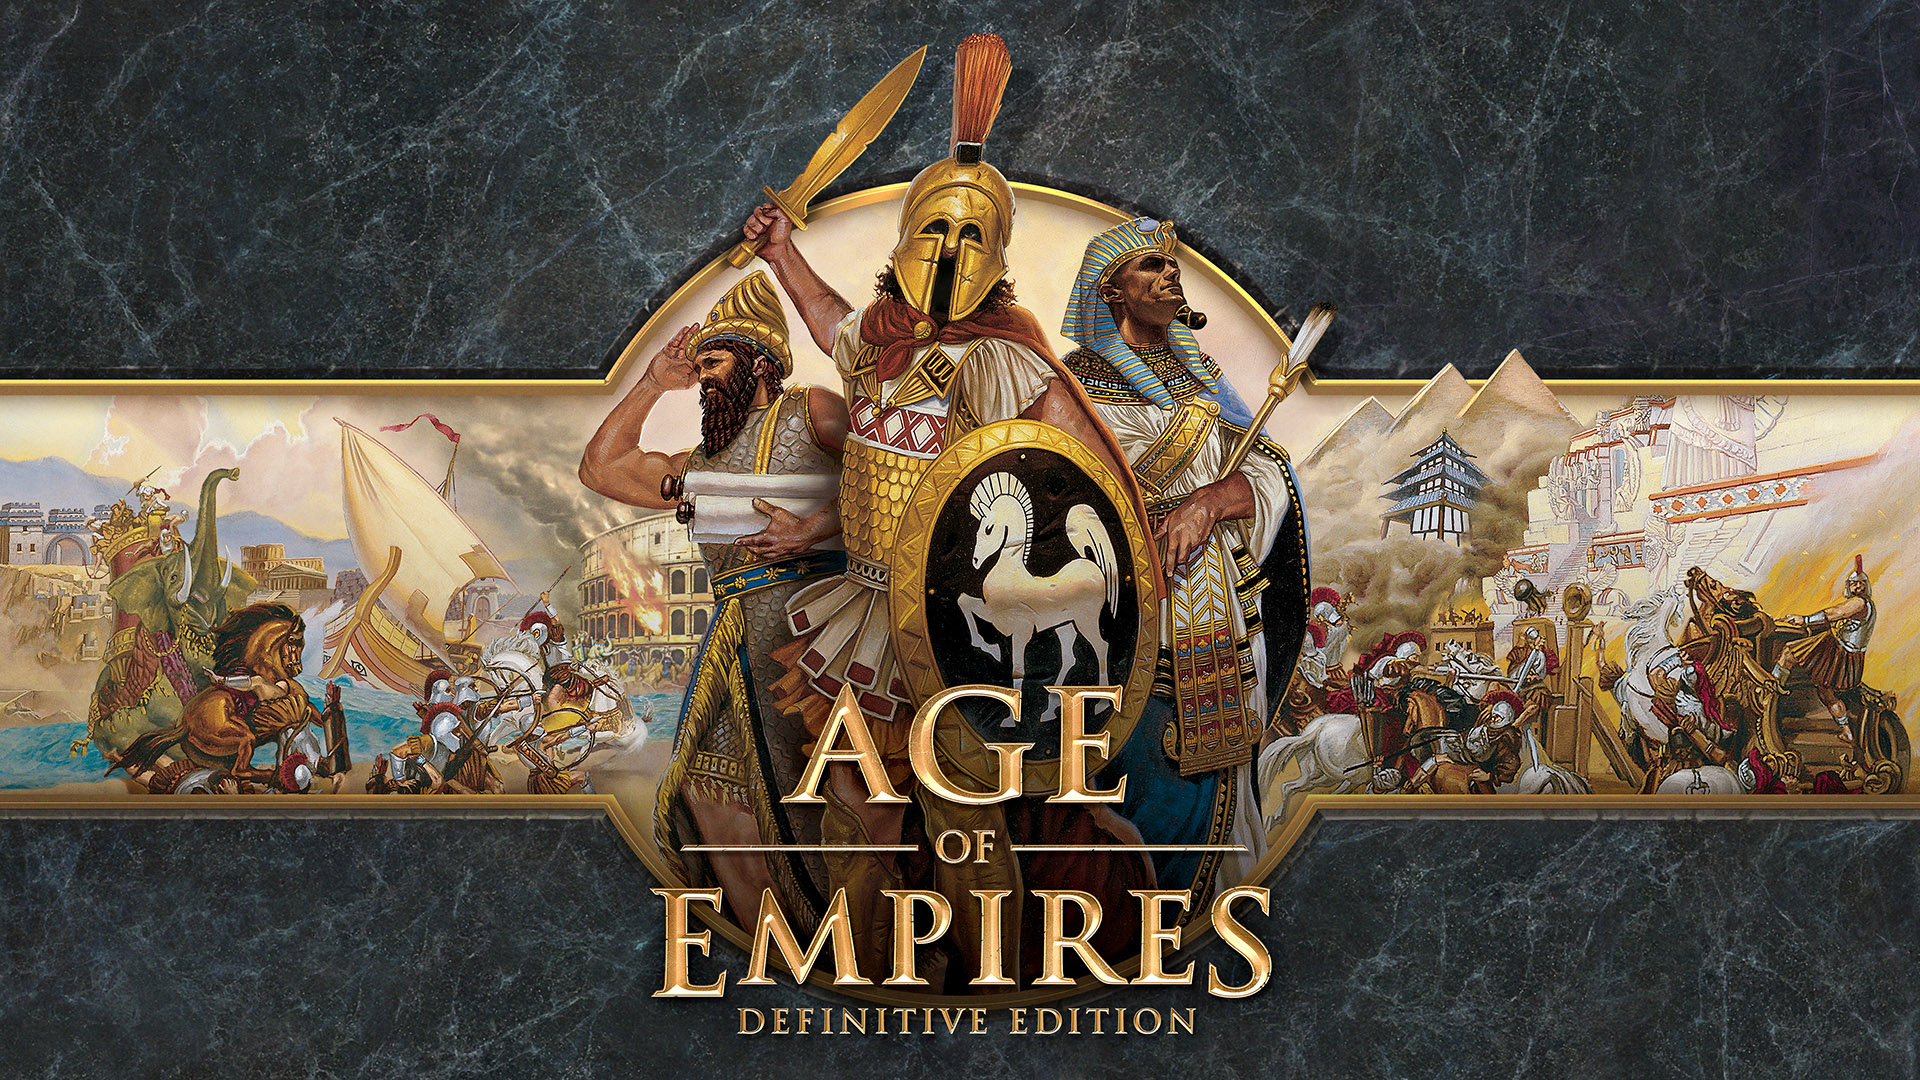 Age of Empires: Definitive Edition GamersRD